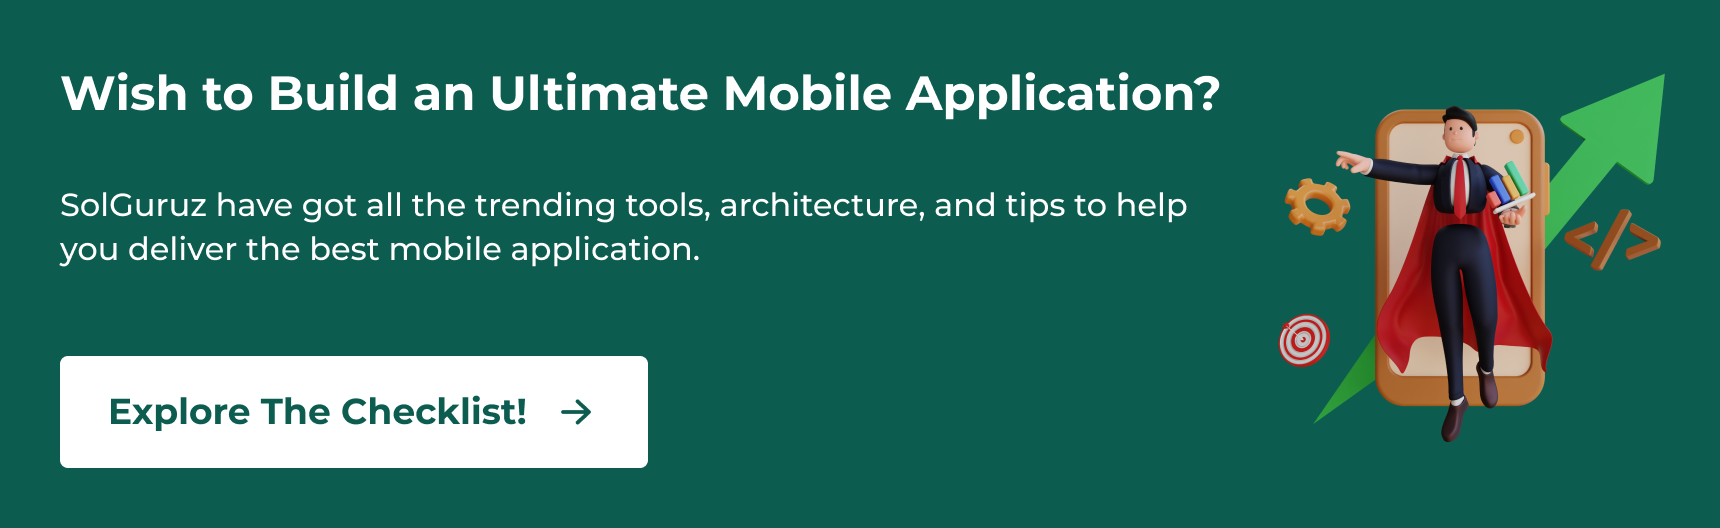 Wish to Build an Ultimate Mobile Application_ Explore the Checklist